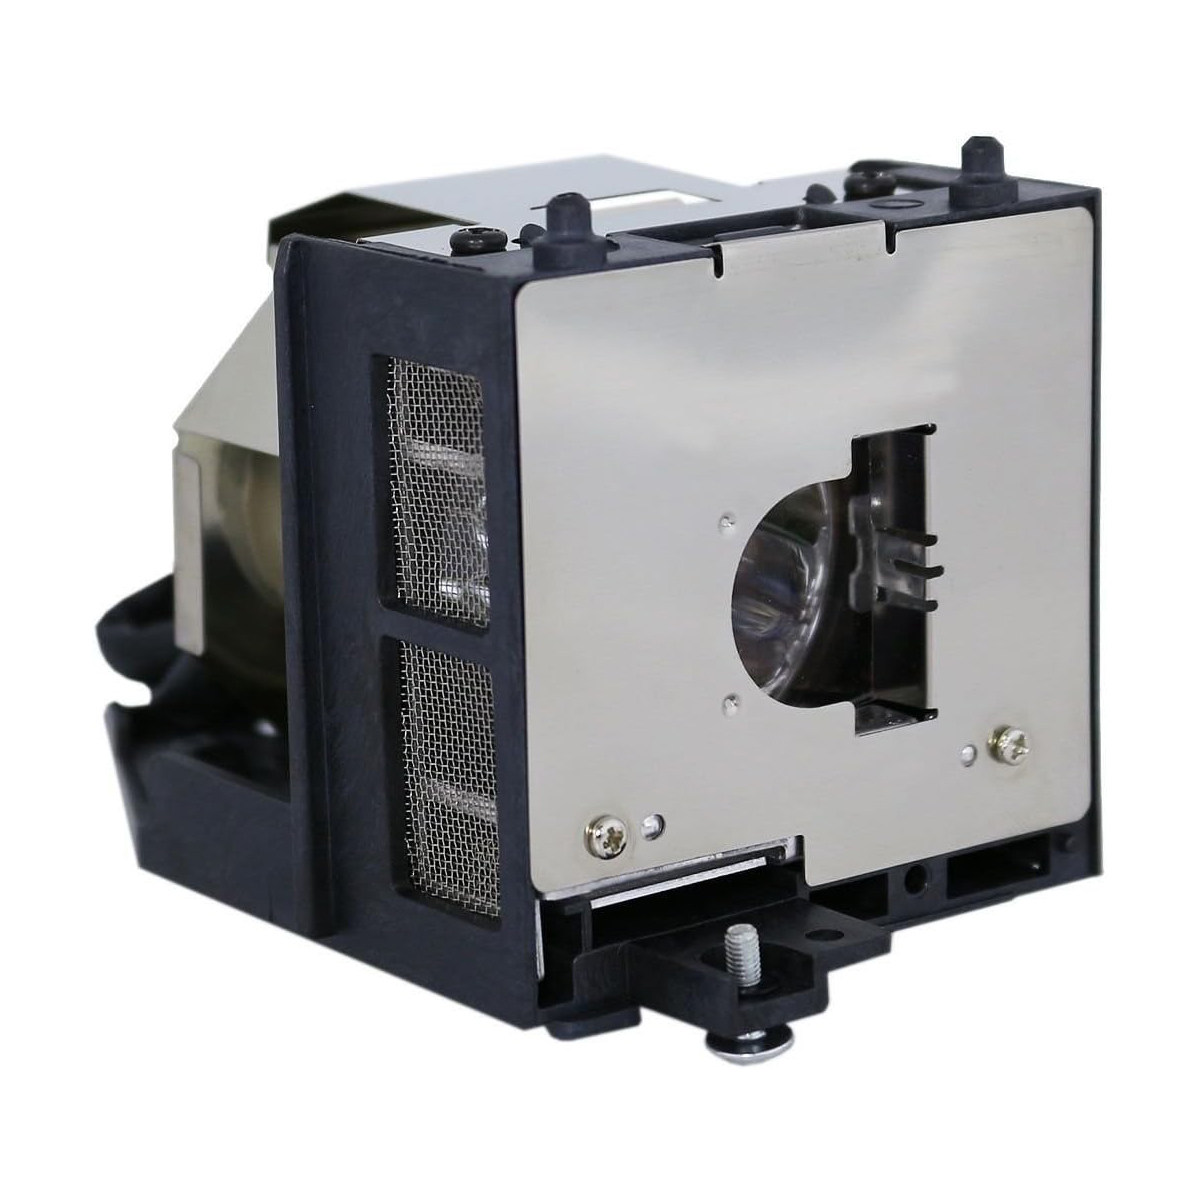 Replacement Projector lamp AN-XR10L2 For SHARP DT-510 XR-10SL XR-10XL